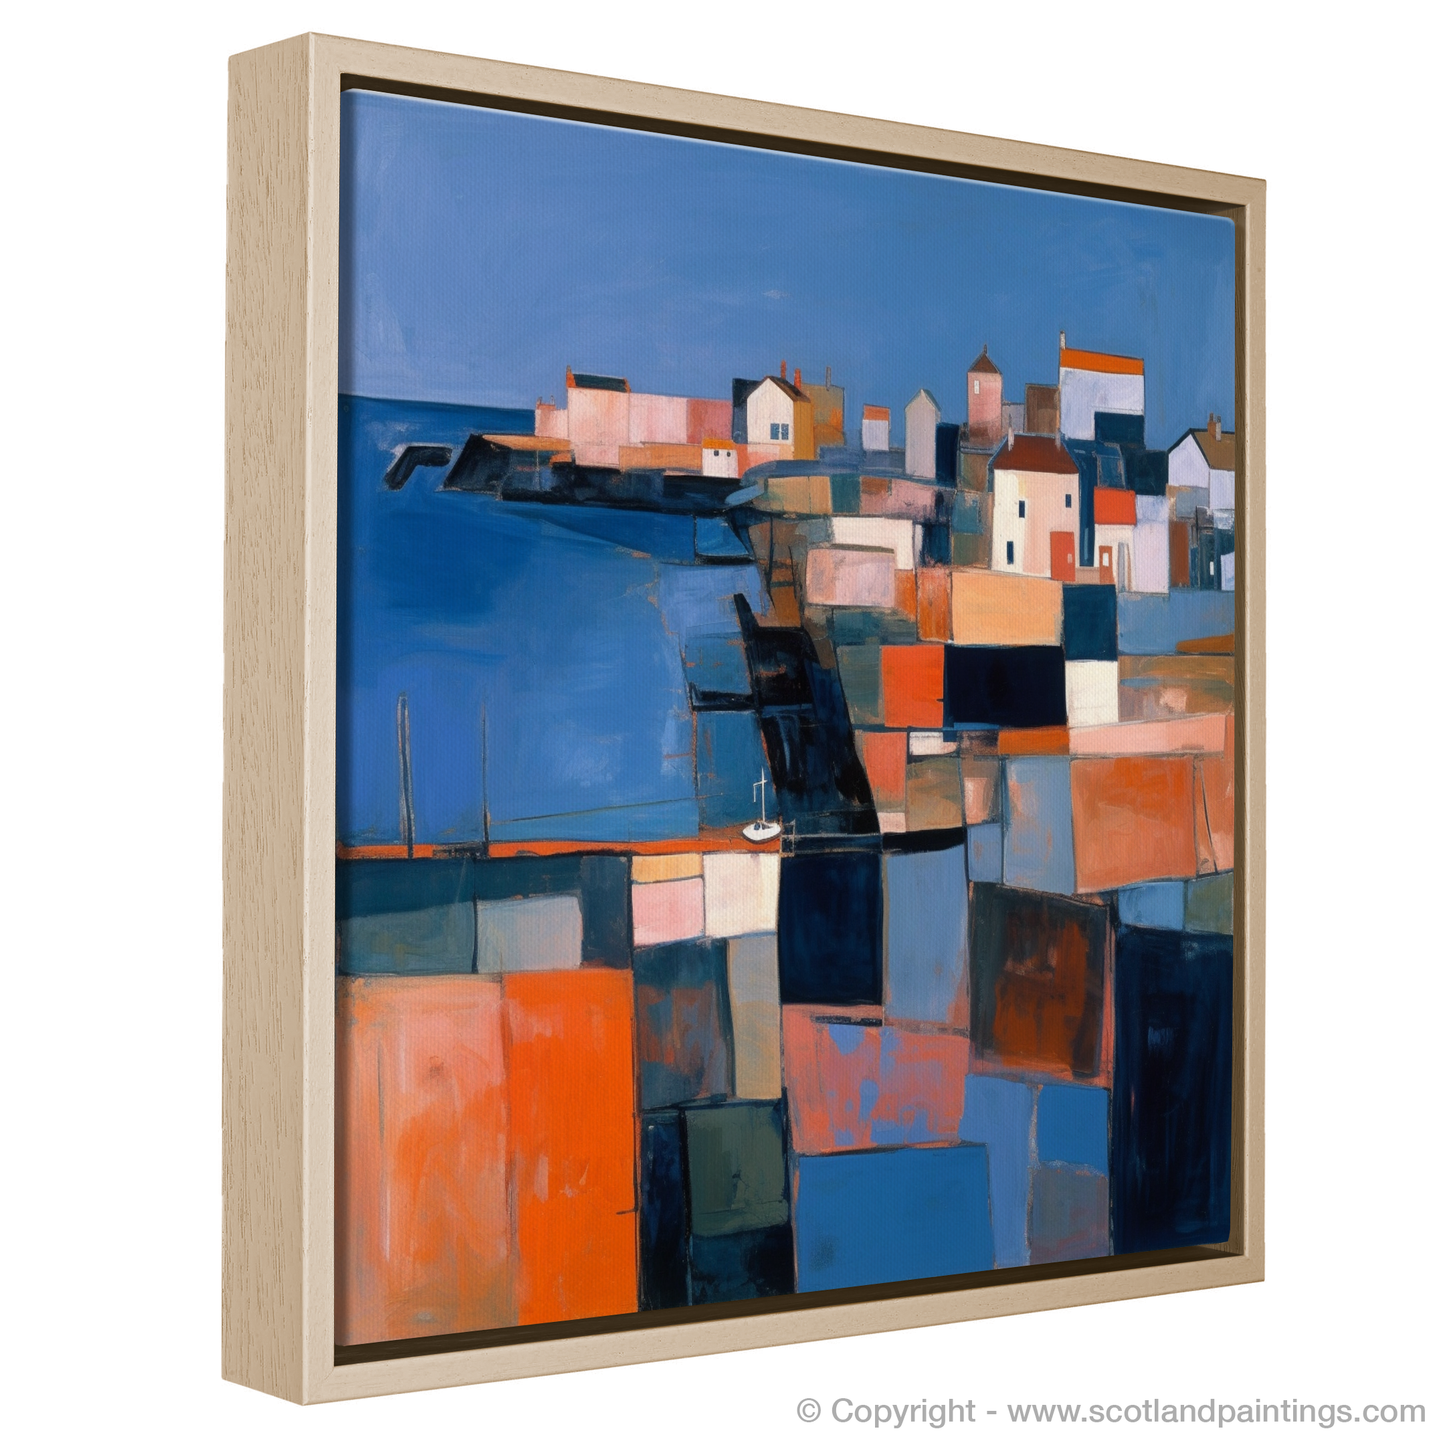 Dusk at Crail Harbour: An Abstract Impressionist Interpretation